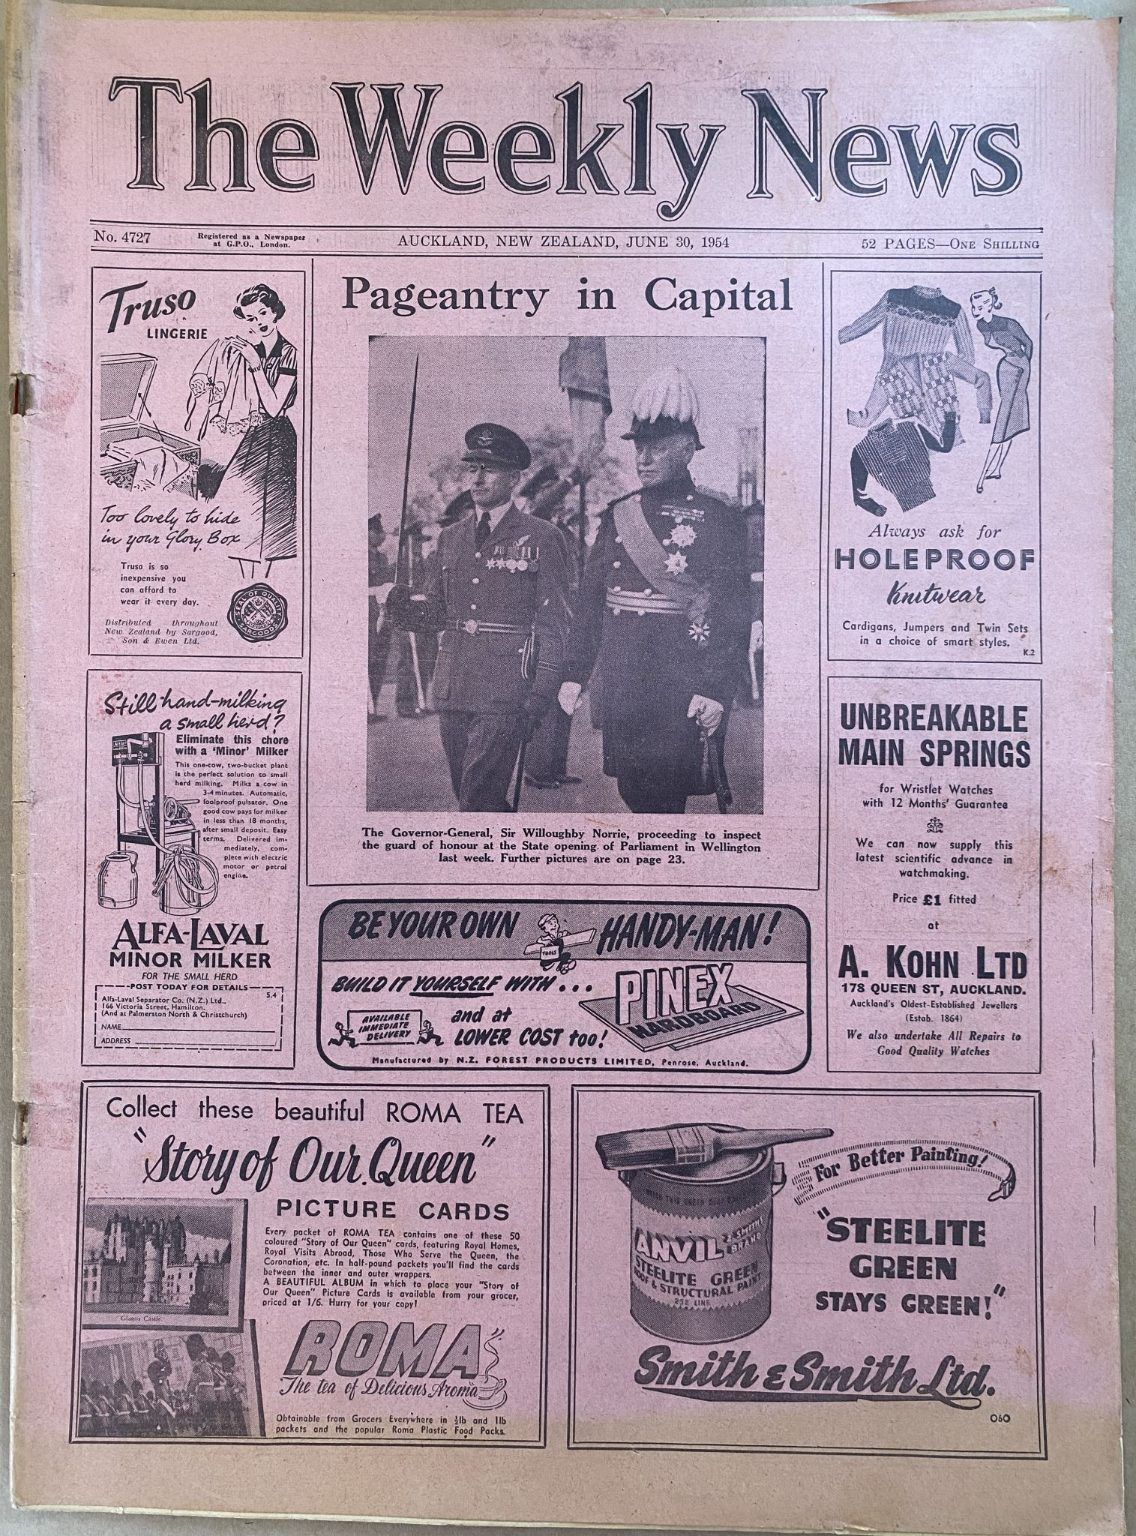 OLD NEWSPAPER: The Weekly News - No. 4727, 30 June 1954